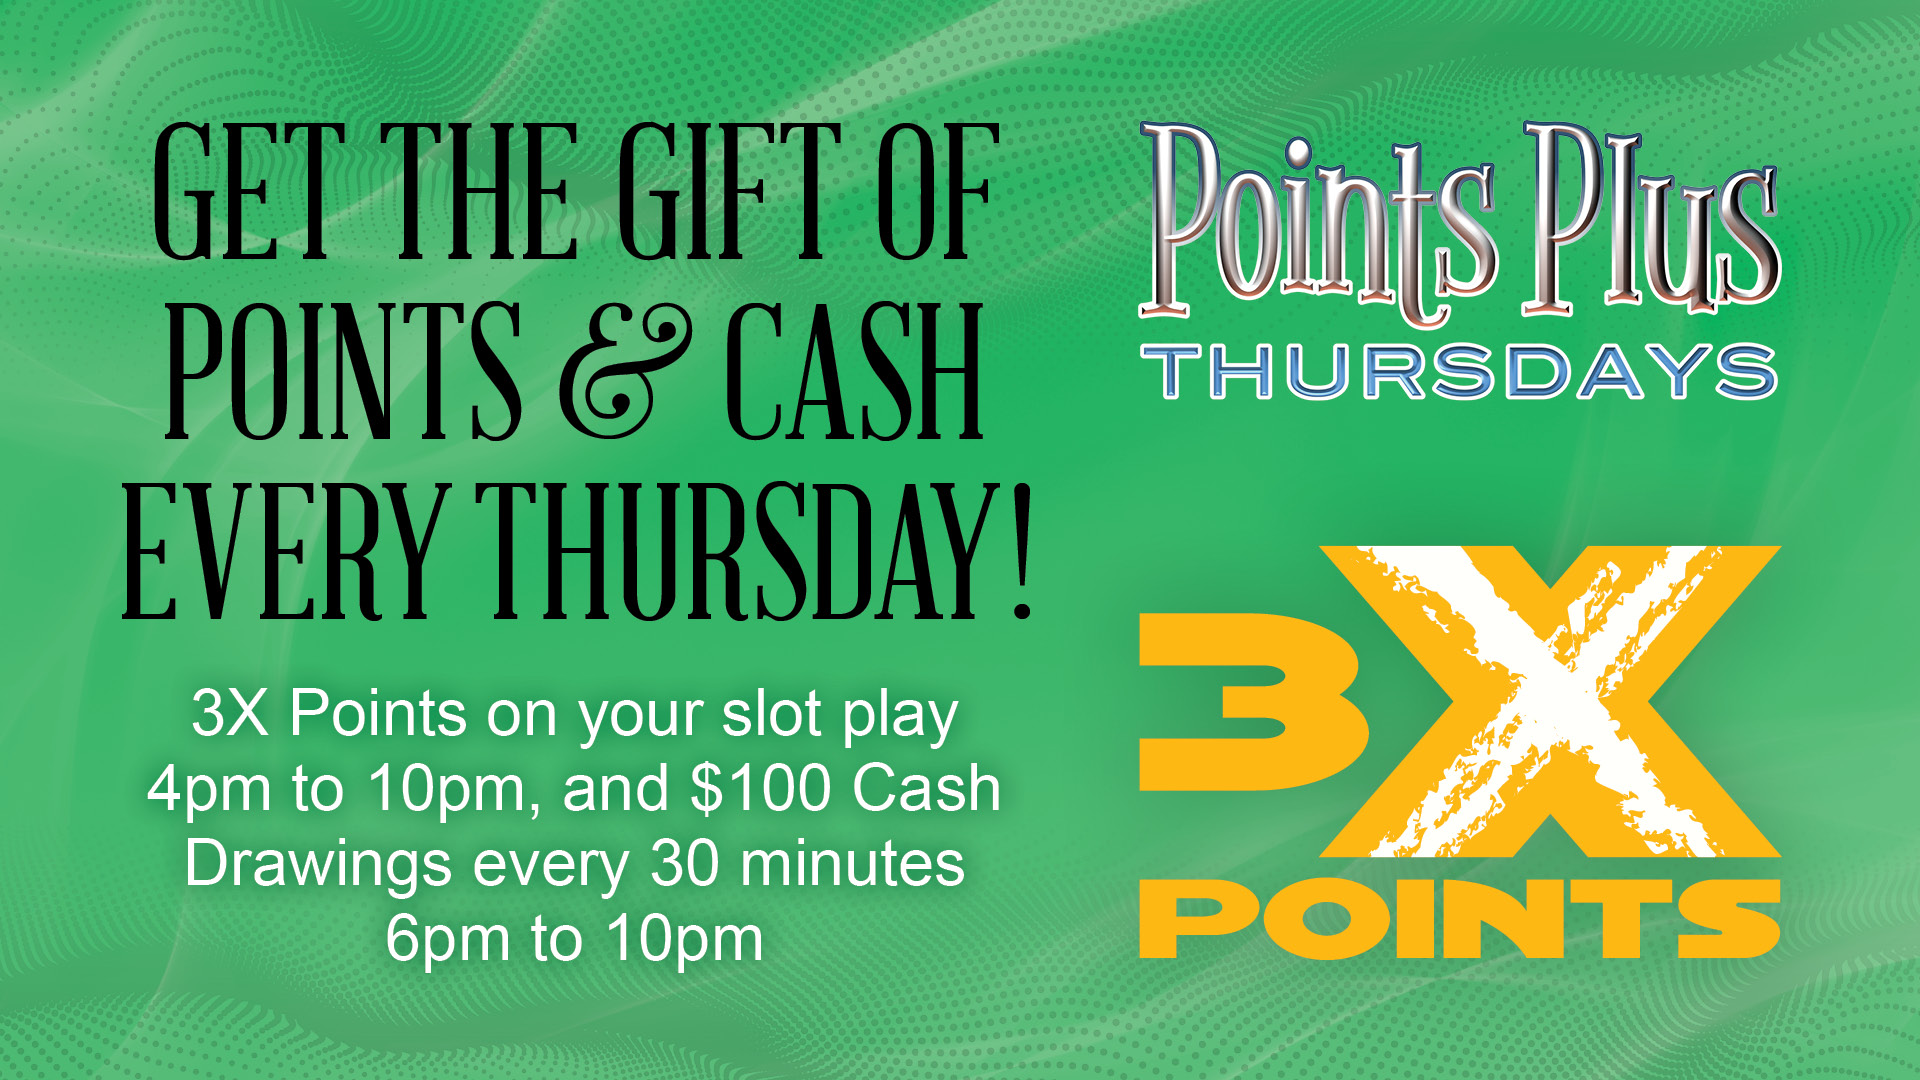 Points Plus Thursdays: Get the gift of points & cash every Thursday! 3X Points on your slot play 4pm to 10pm, and $100 Cash Drawings every 30 minutes 6pm to 10pm